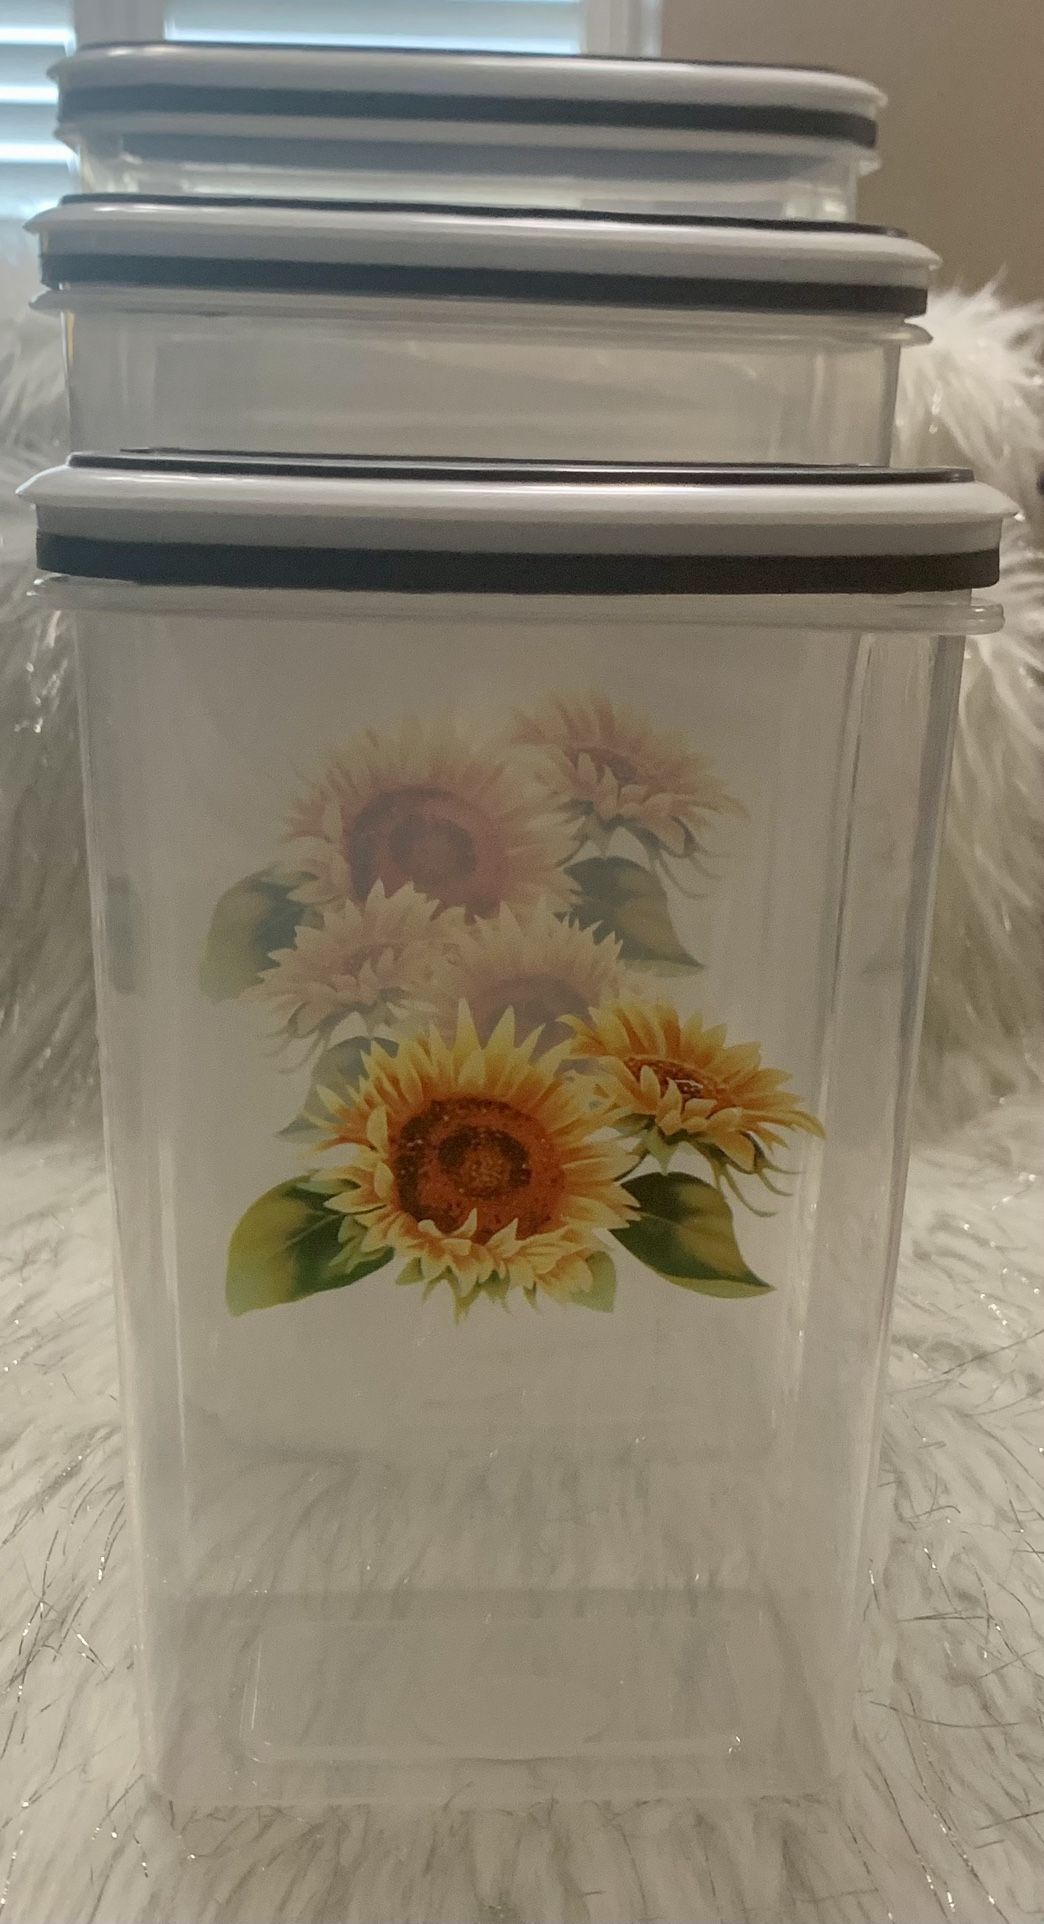 Set of 3 Plastic Storage Containers with Sunflower Design